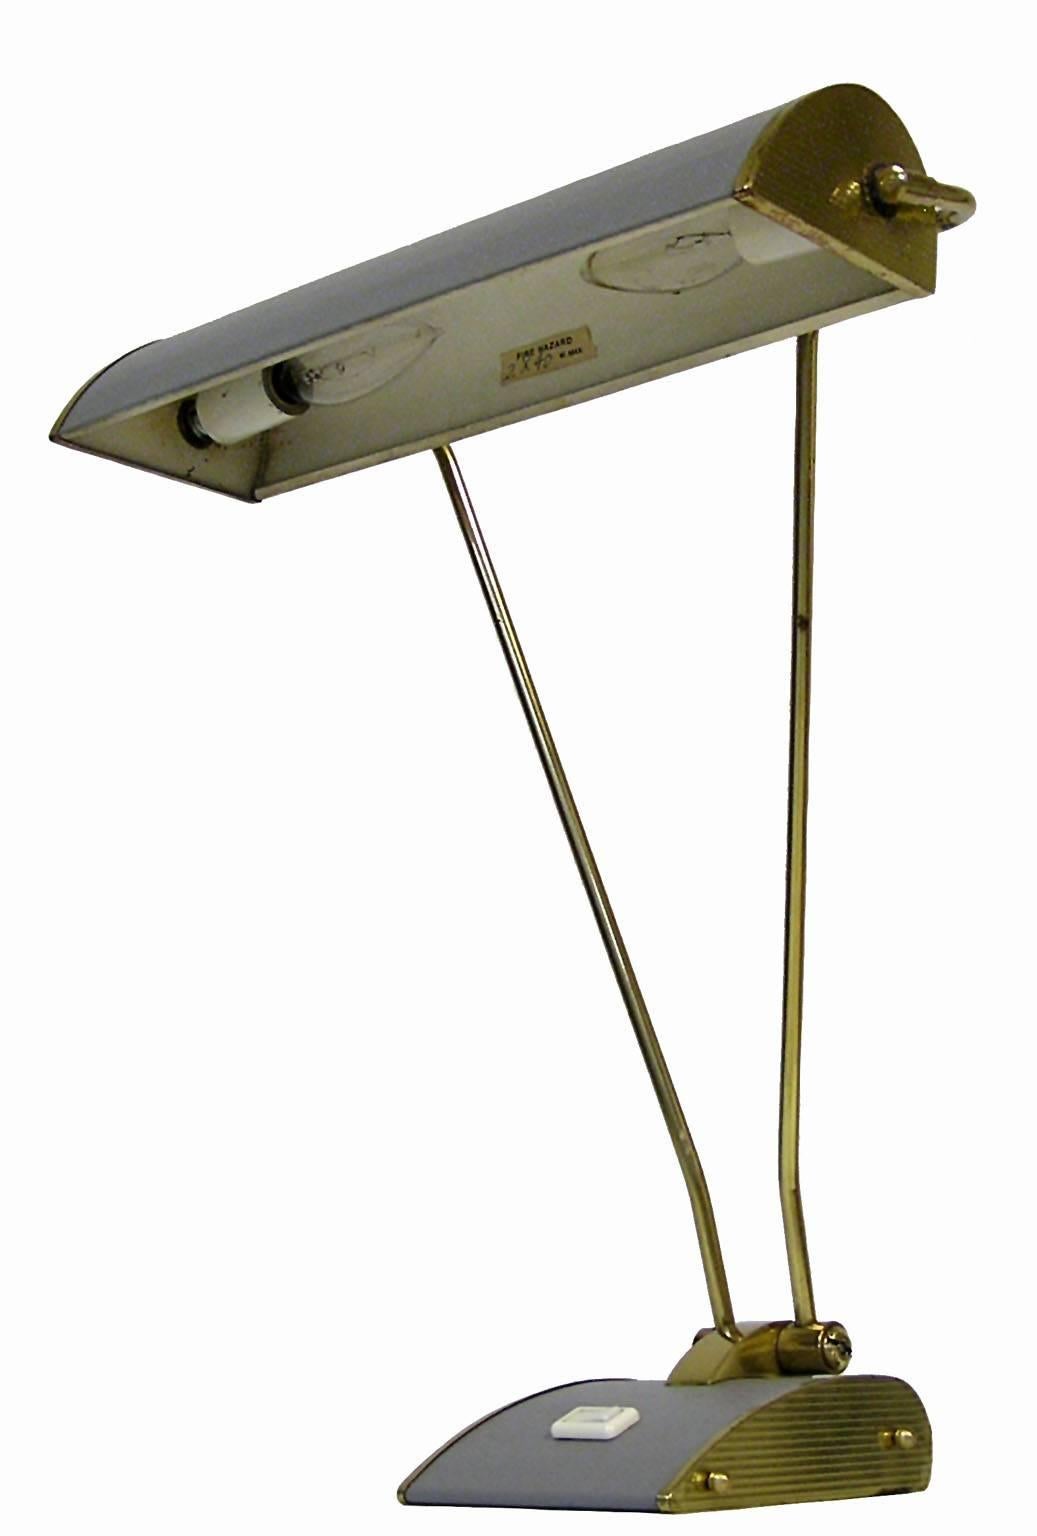 1940s Art Deco Desk Lamp by Eileen Gray for Jumo, France In Good Condition For Sale In Winnipeg, Manitoba